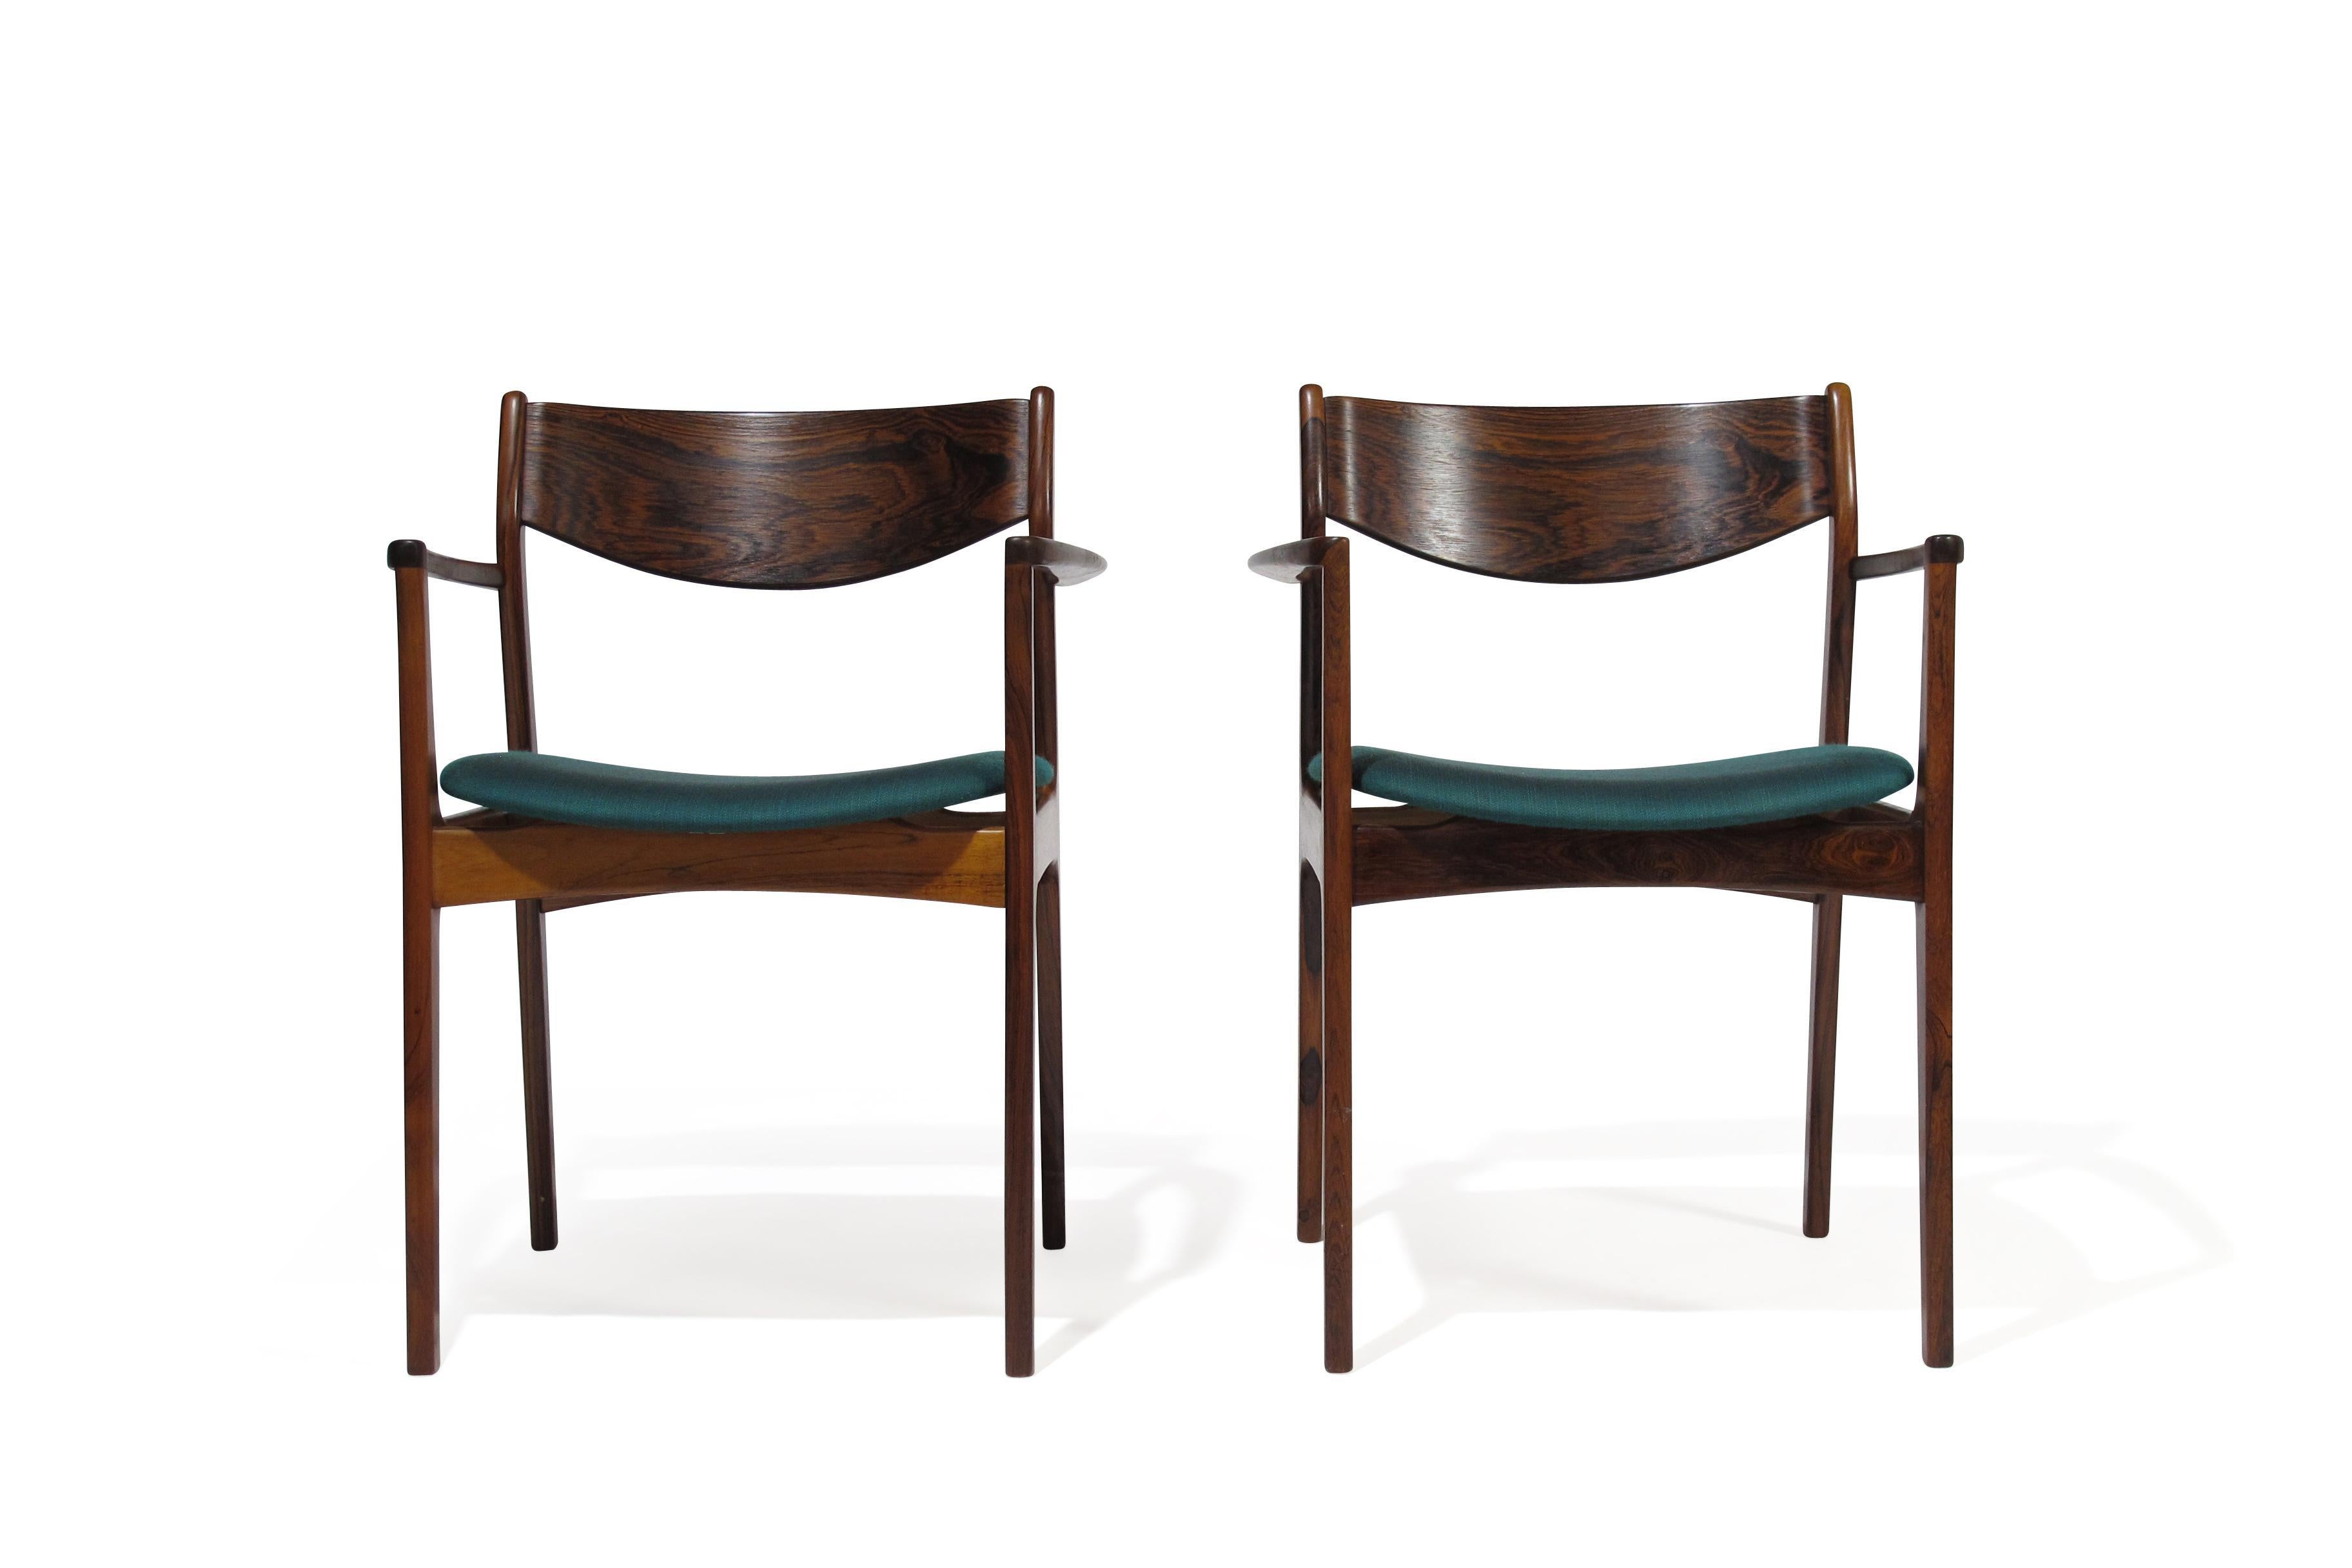 Oiled P.E. Jorgensen Rosewood Dining Armchairs